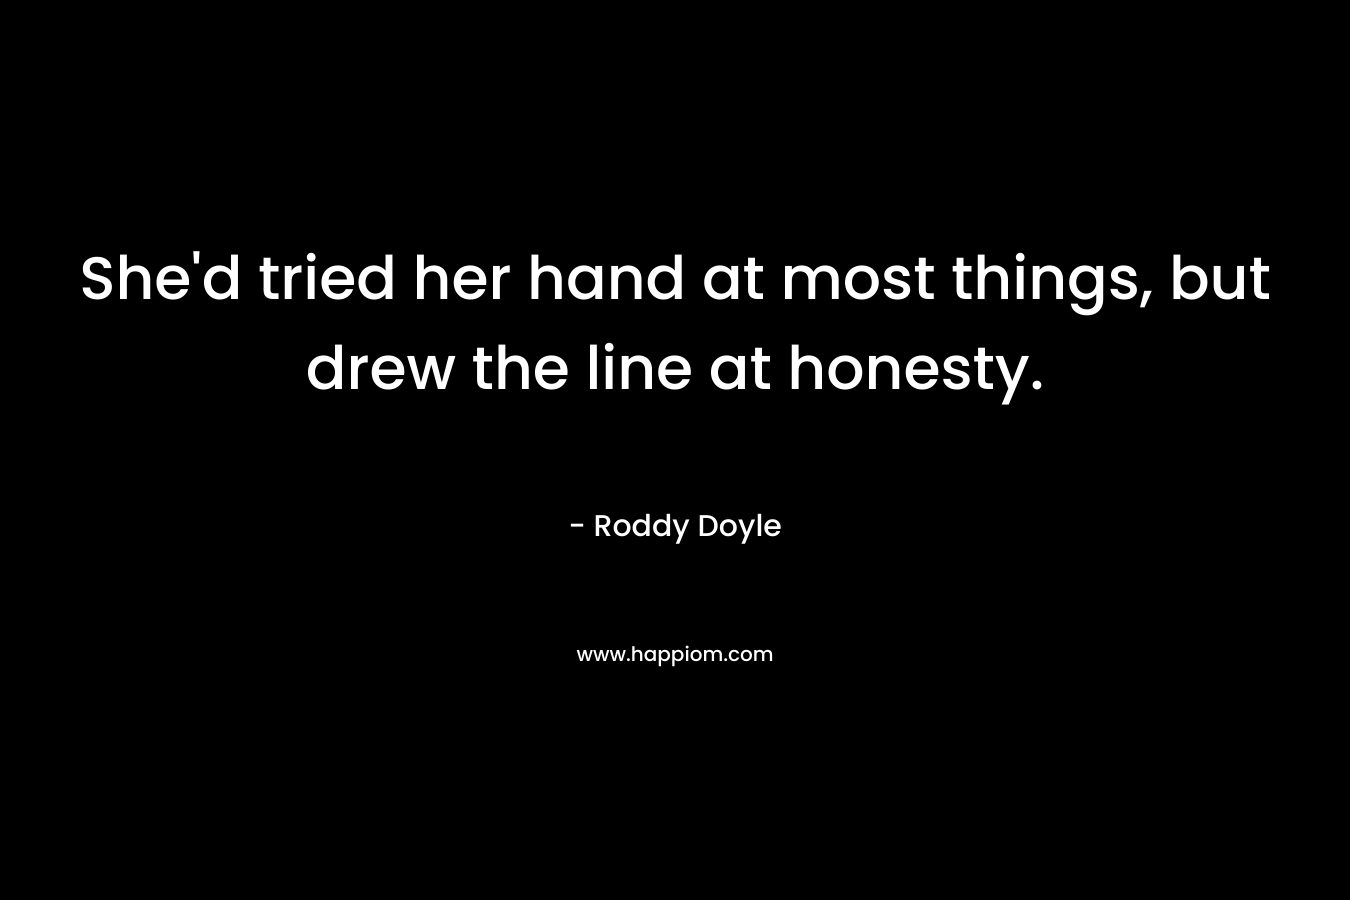 She’d tried her hand at most things, but drew the line at honesty. – Roddy Doyle